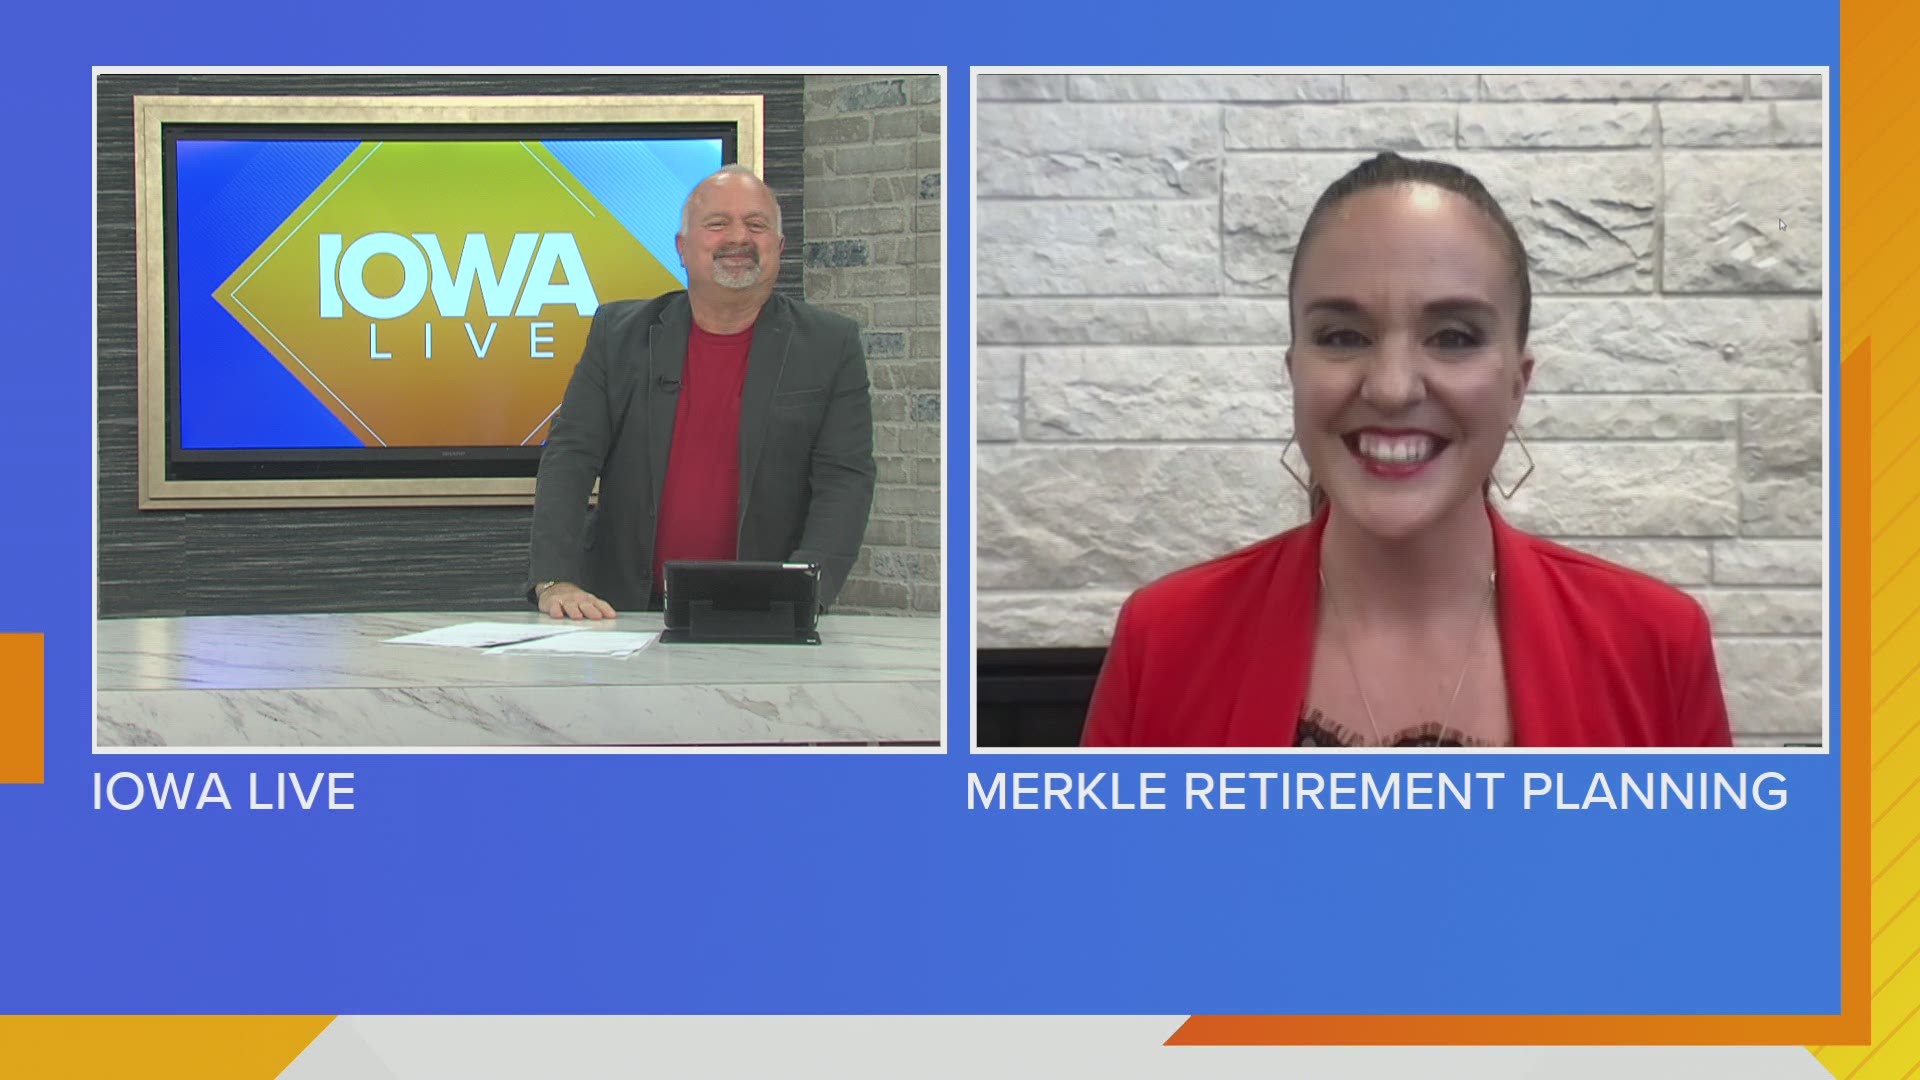 Annamarie Morrow, Director of Medicare at Merkle Retirement Planning explains the basics of Medicare and lets everyone know about a Workshop coming to Altoona!